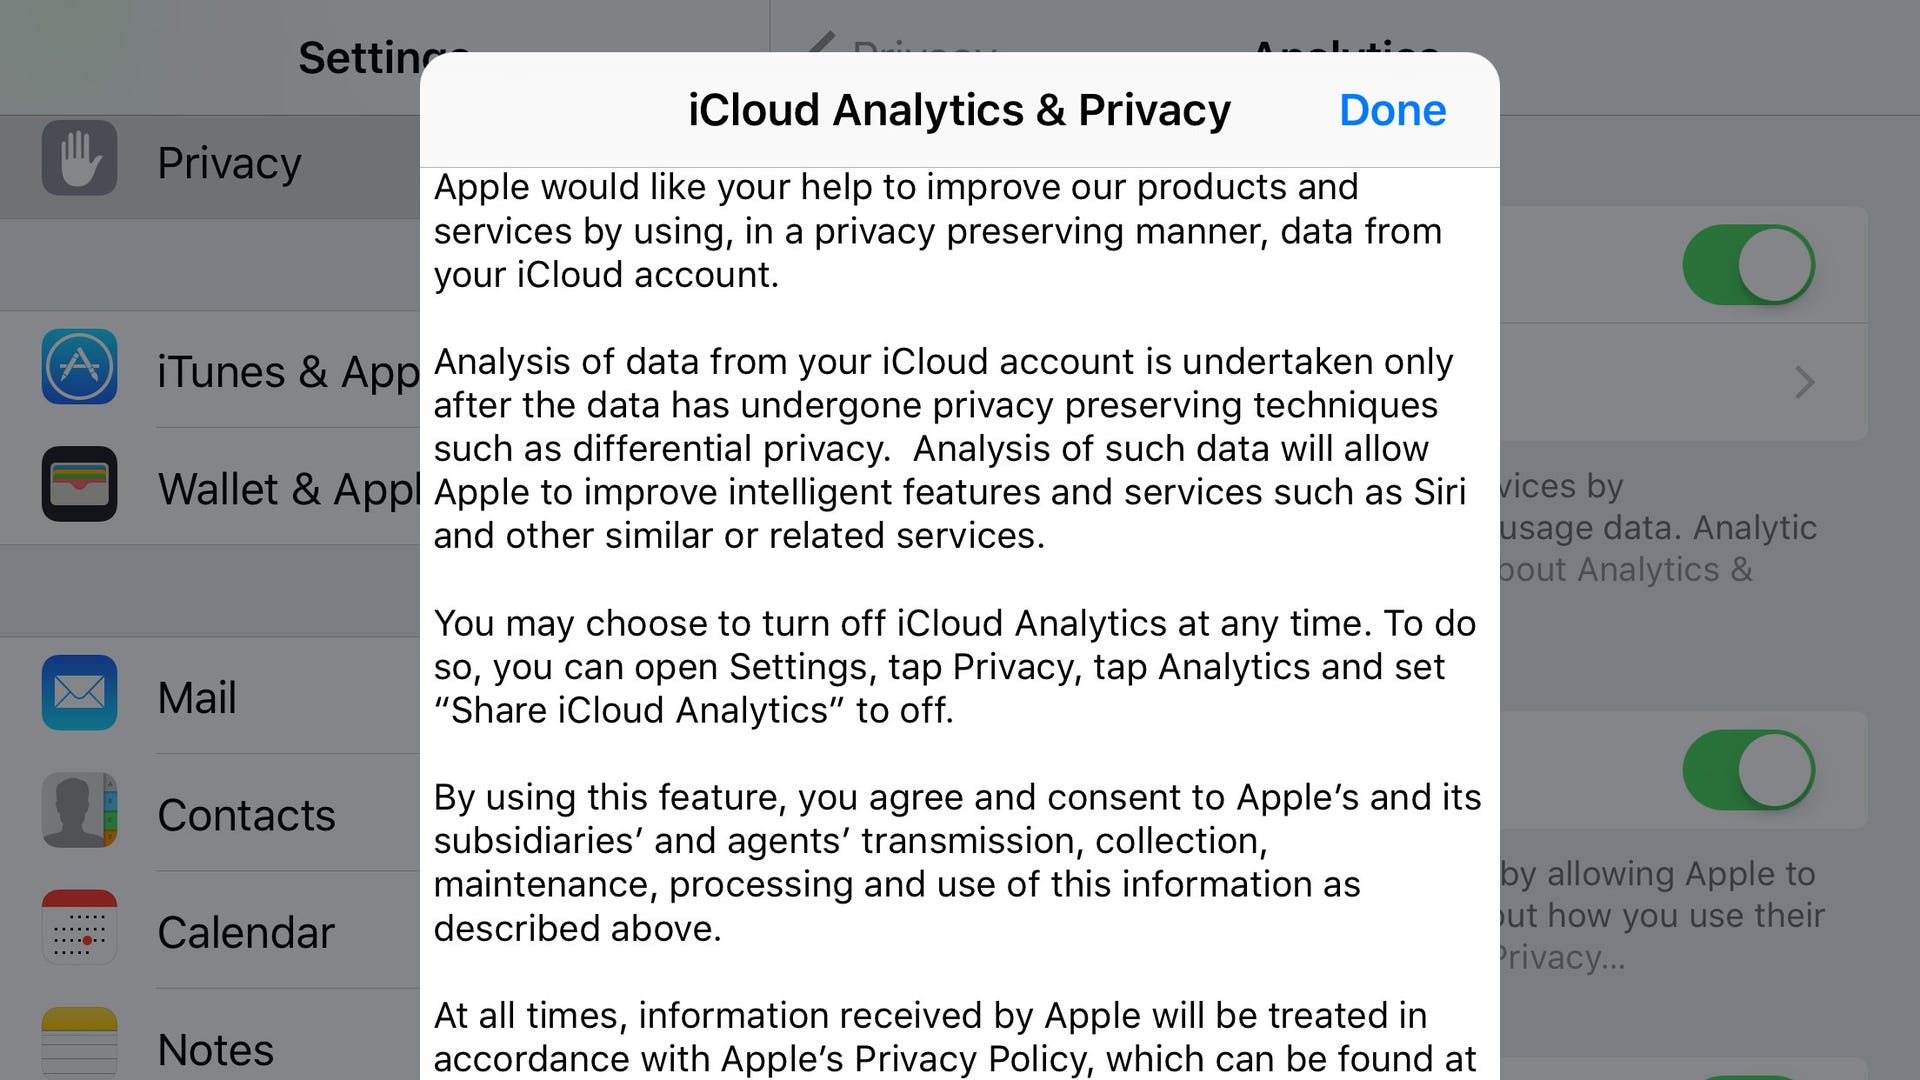 Apple's iOS 10.3 software describes how Apple wants to gather iCloud data to improve services.​